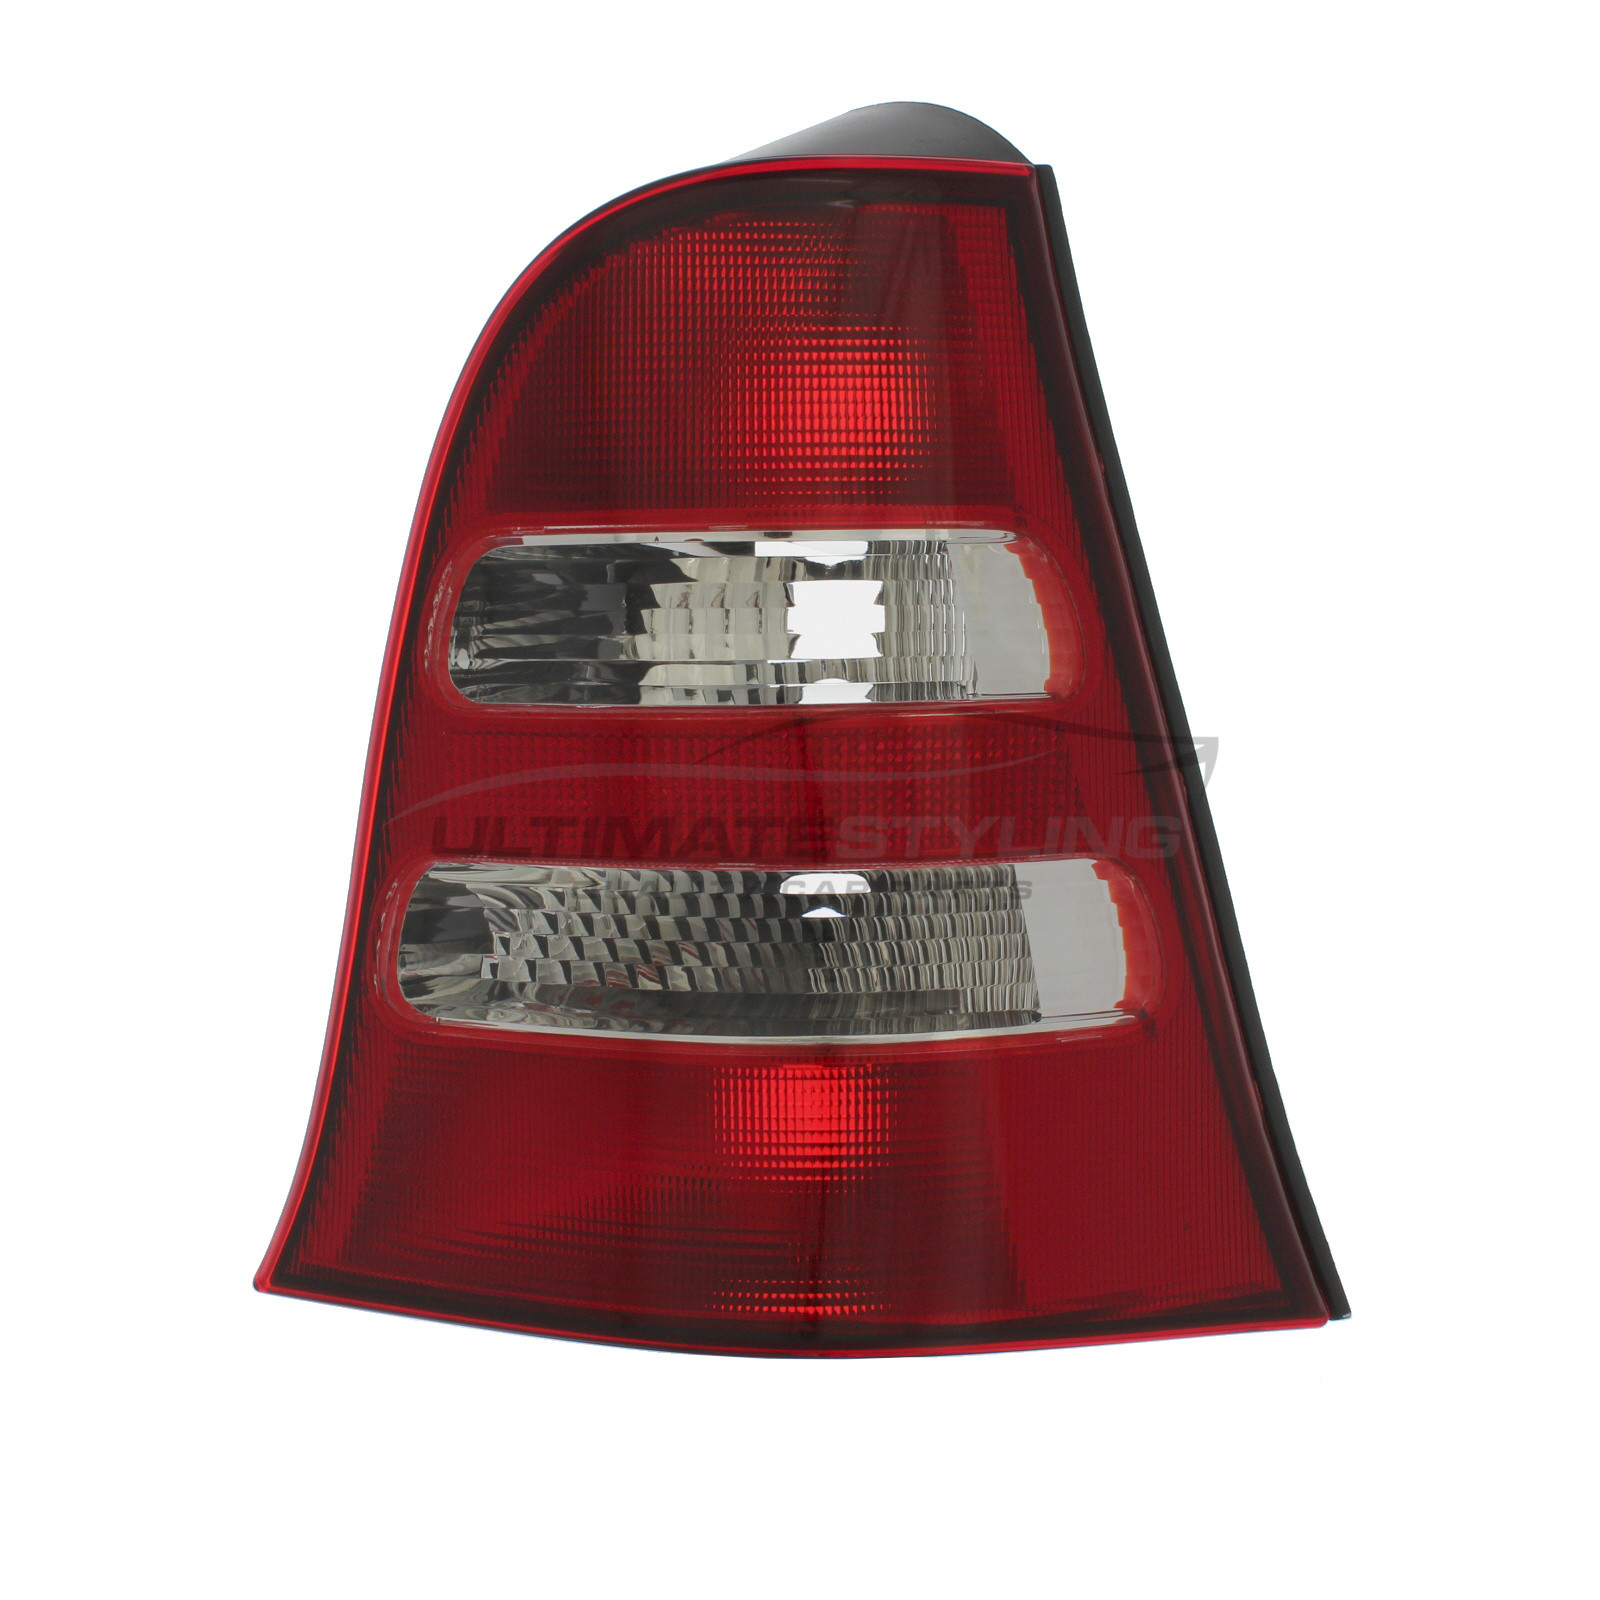 Mercedes Benz A Class 2001-2005 Non-LED with Clear Indicator Rear Light / Tail Light Excluding Bulb Holder Drivers Side (RH)